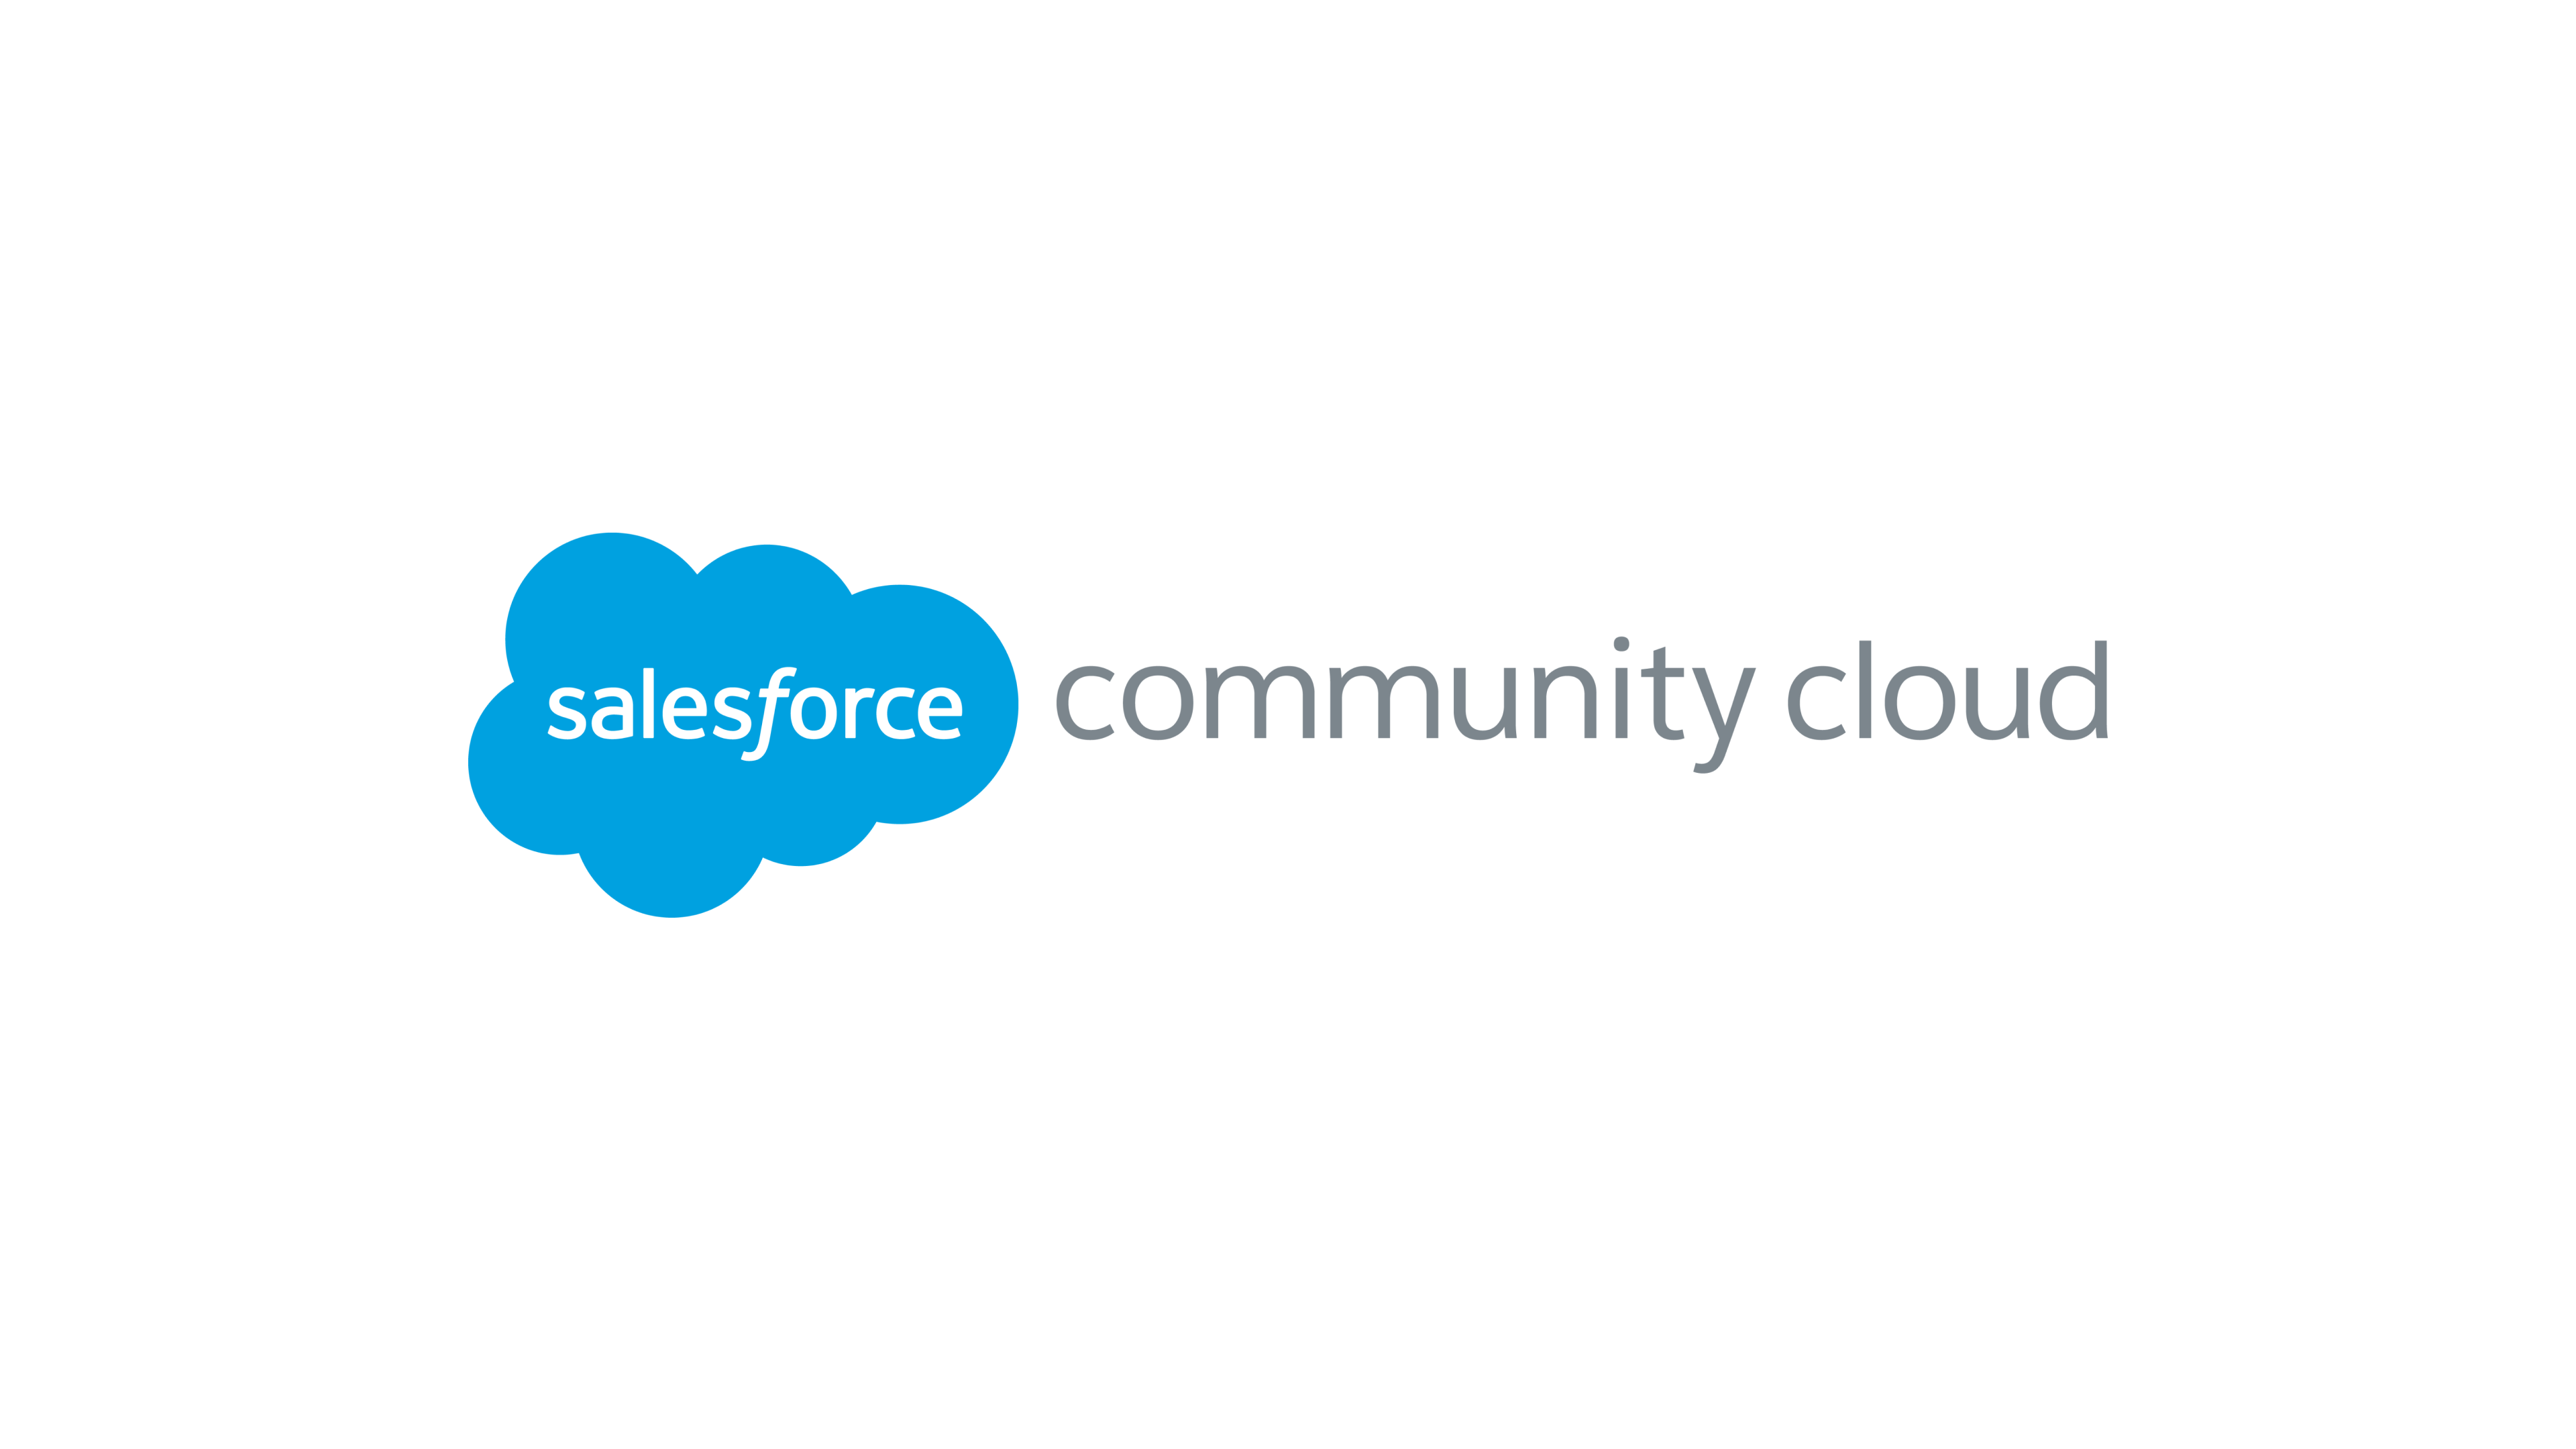 Is Salesforce Communities’ Auto-Tagging Right for You? Or Should You Use a Controlled Vocabulary Instead?